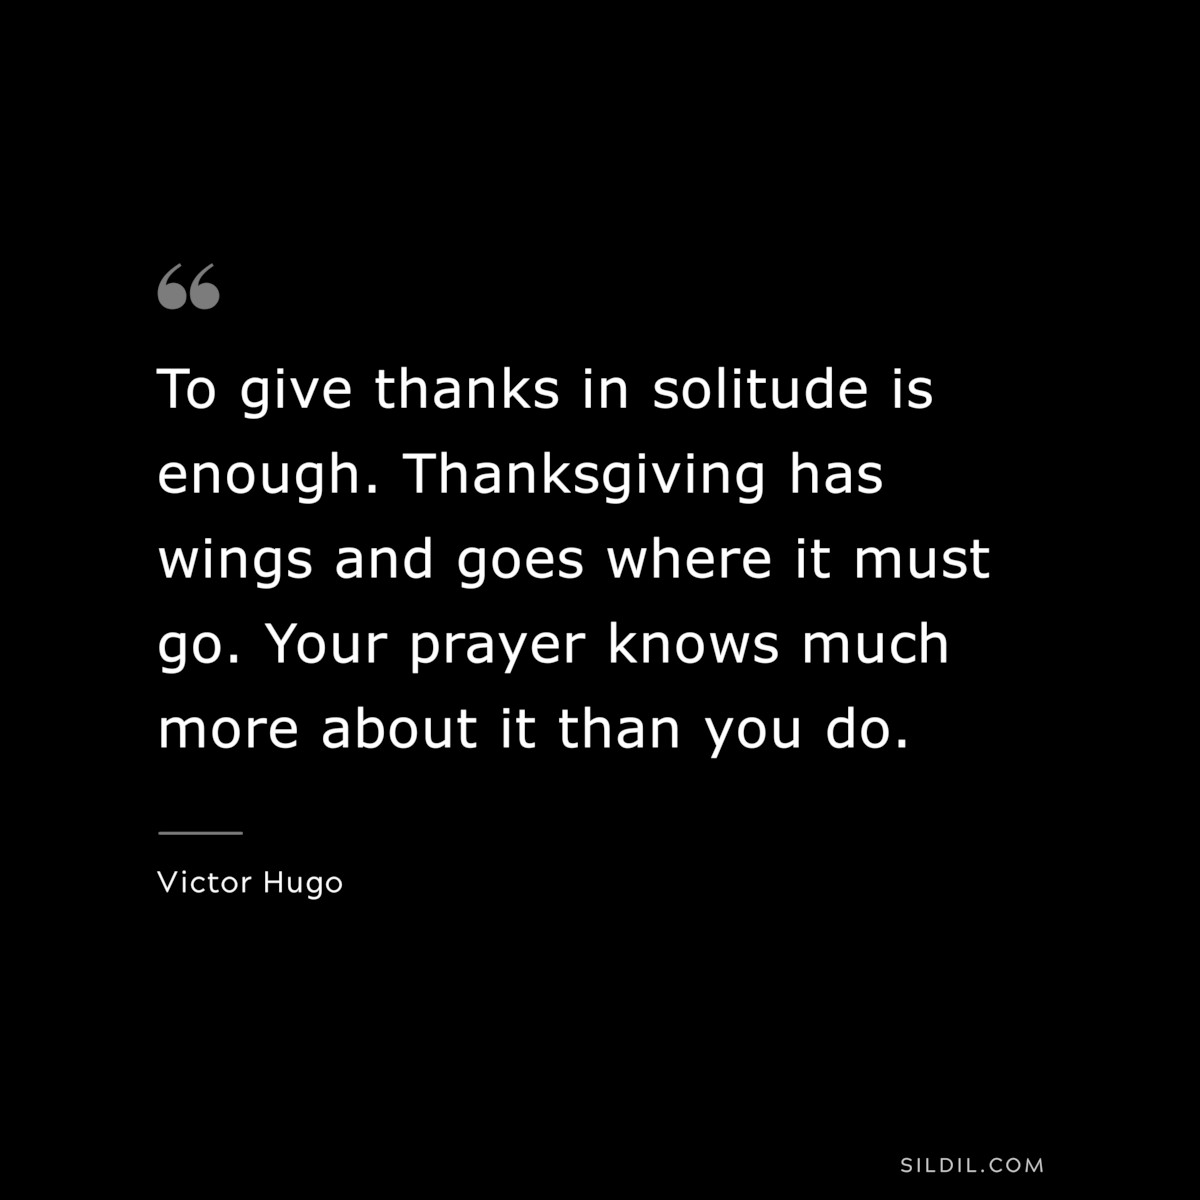 To give thanks in solitude is enough. Thanksgiving has wings and goes where it must go. Your prayer knows much more about it than you do.― Victor Hugo